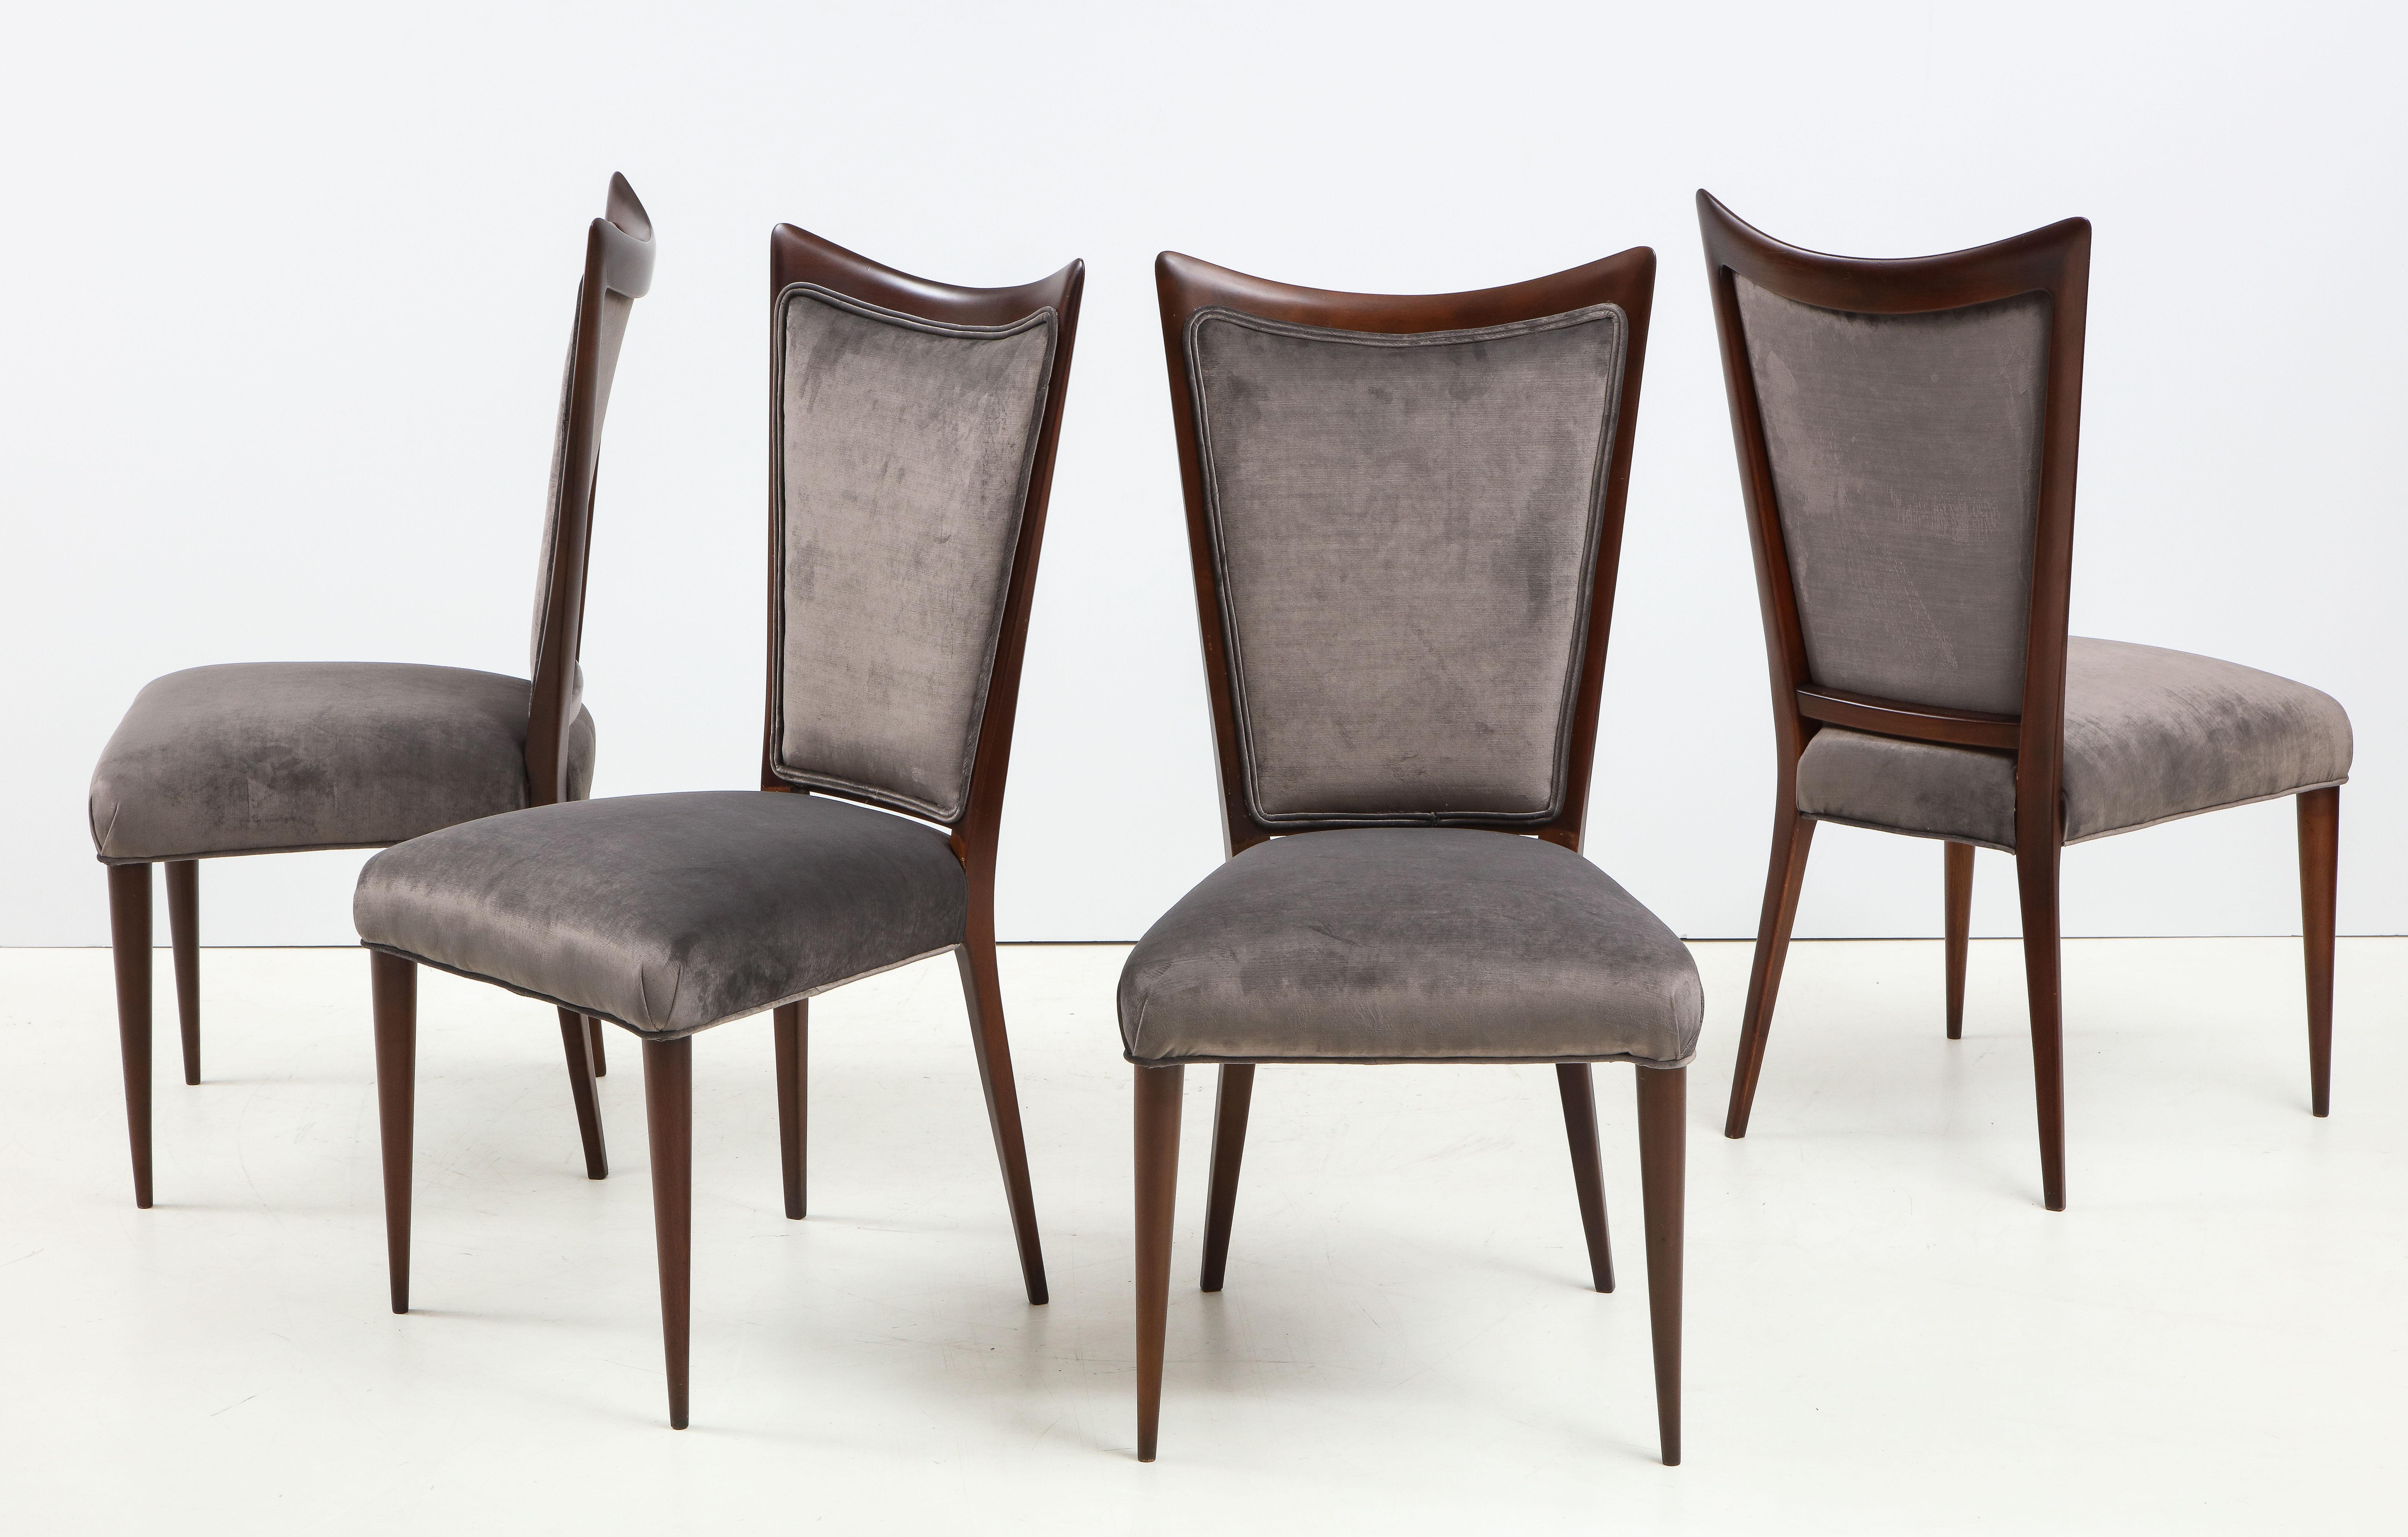 Stunning set of 4 1960s modernist walnut Italian dining chairs newly re-upholstered in velvet in the style of Gio Ponti.